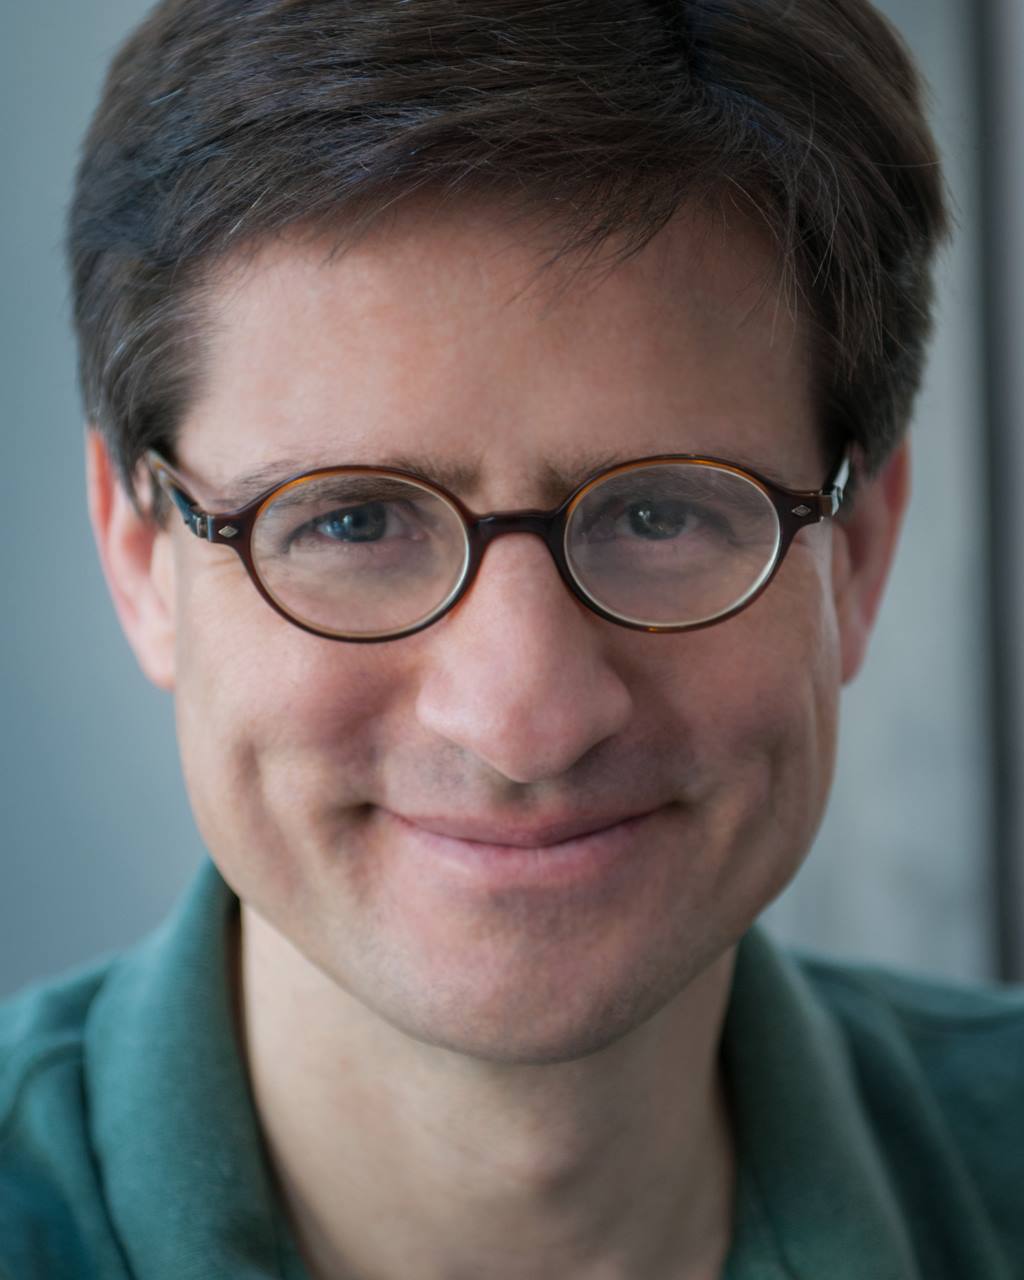 headshot of man wearing glasses with short brown hair